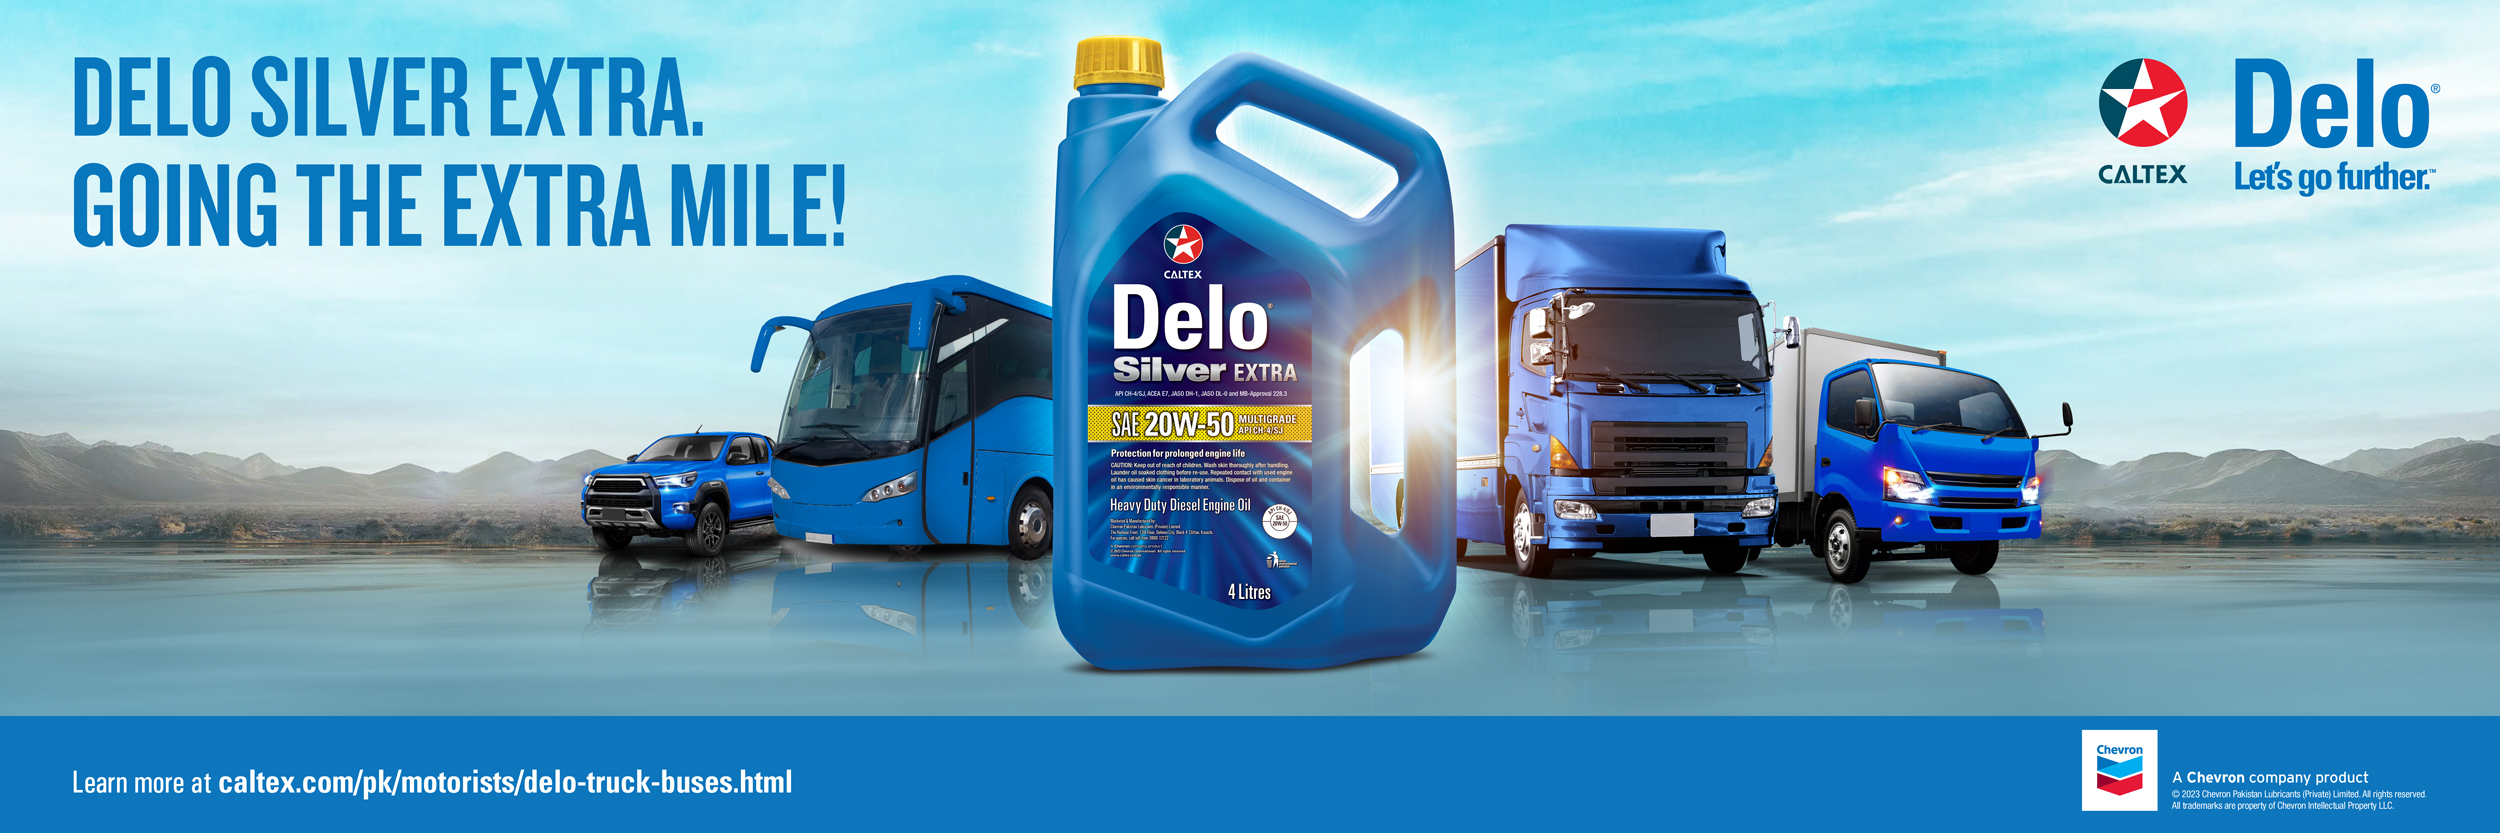 Delo Silver Extra - Going The Extra Mile!